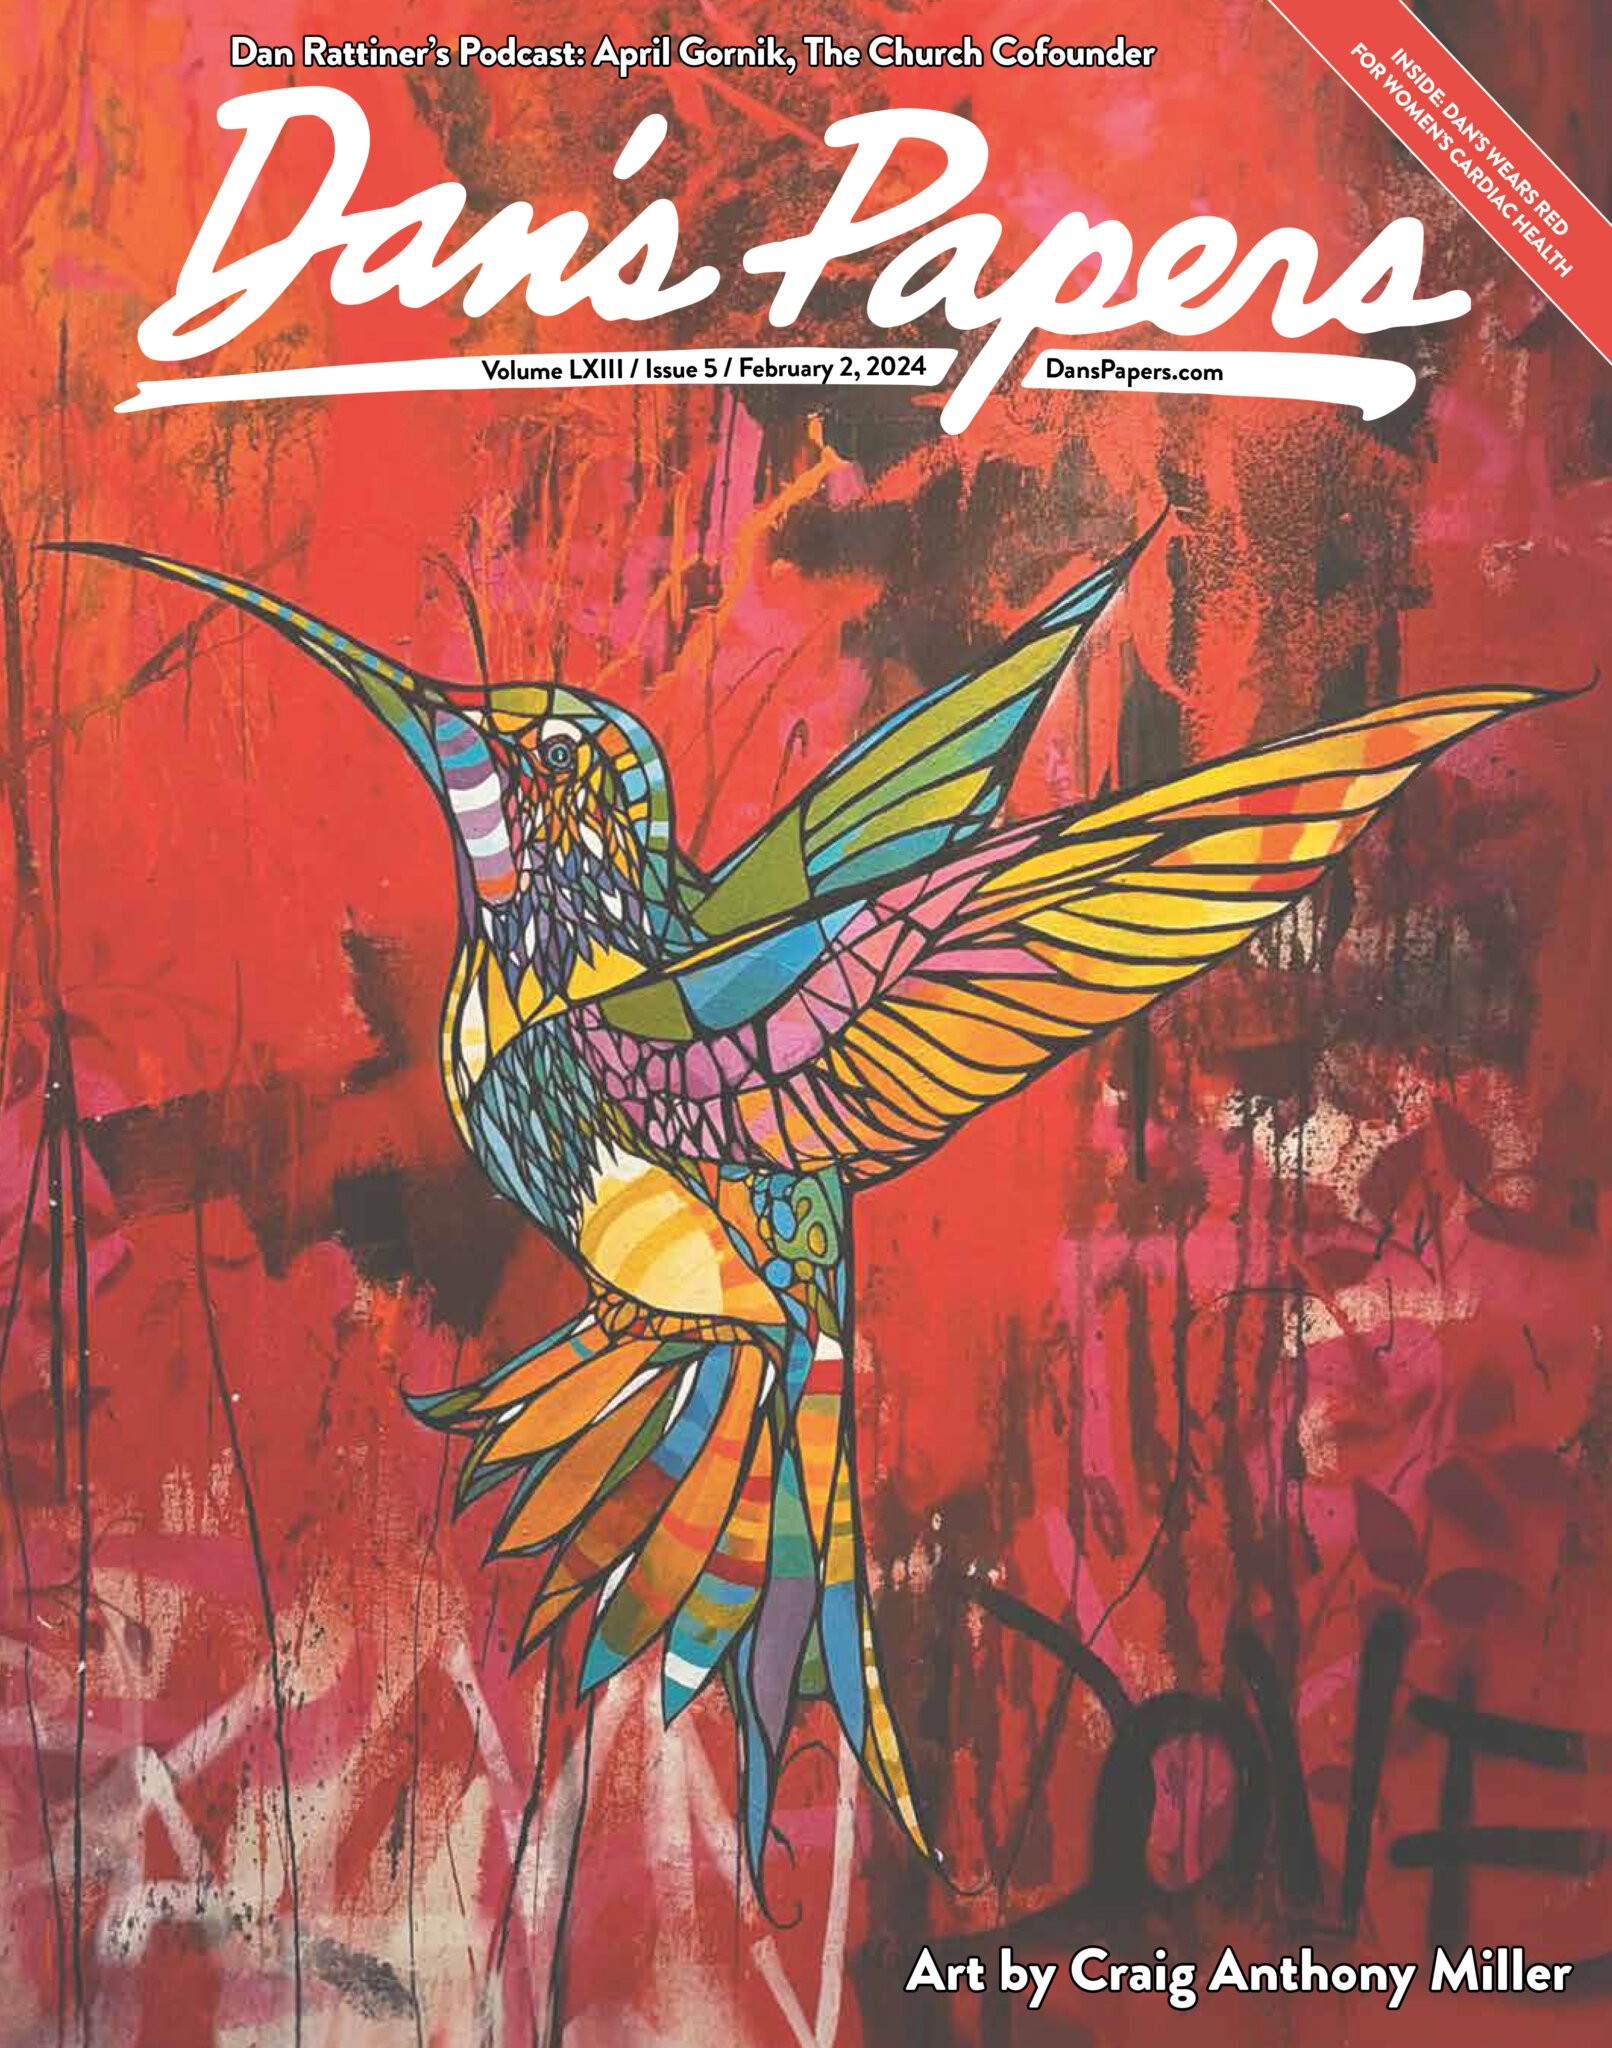 February 2, 2024 Dan's Papers cover art by Craig Anthony Miller